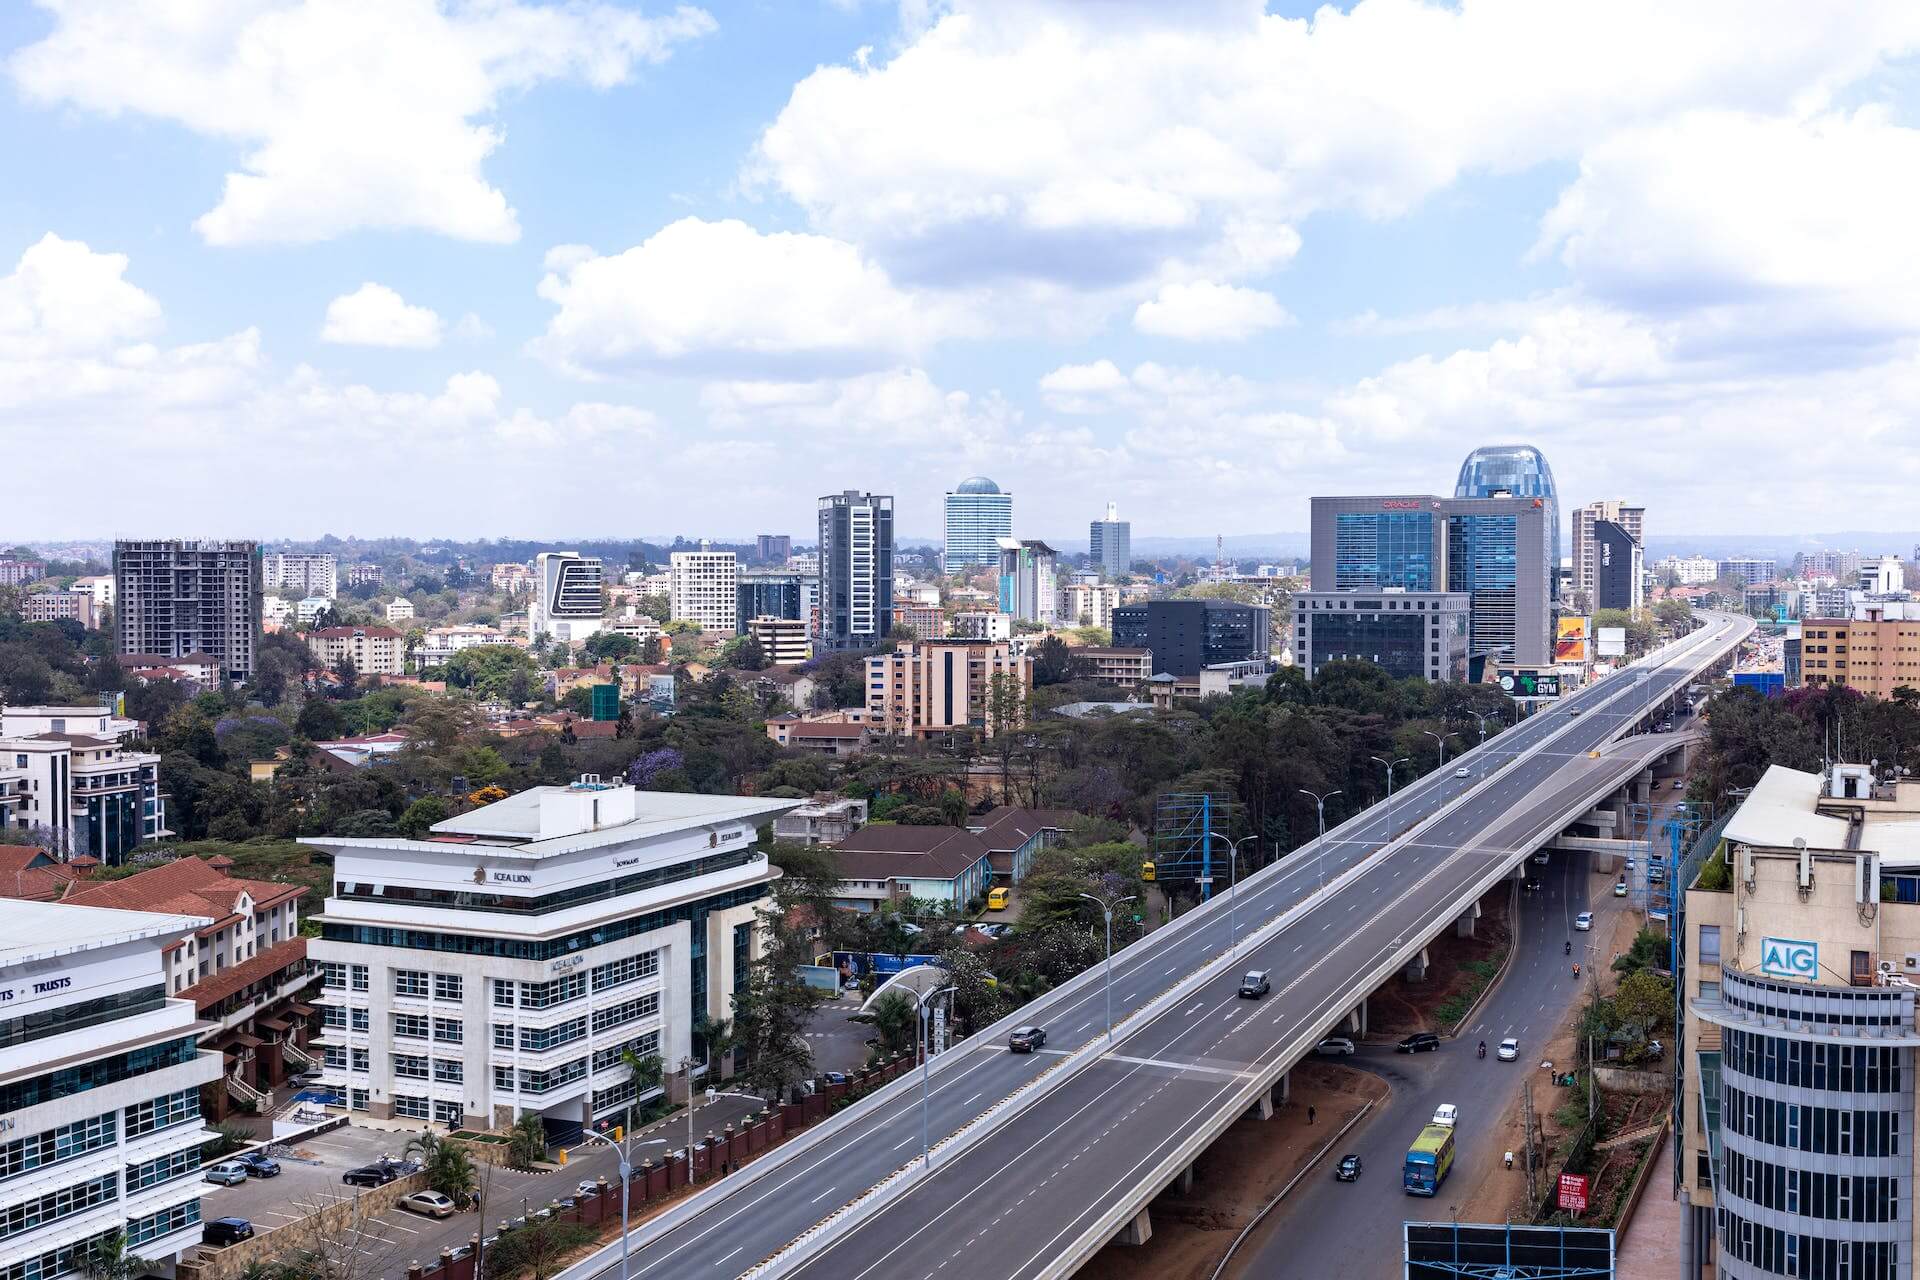 A bustling addis ababa city street with towering buildings in the background, framed by a busy highway.